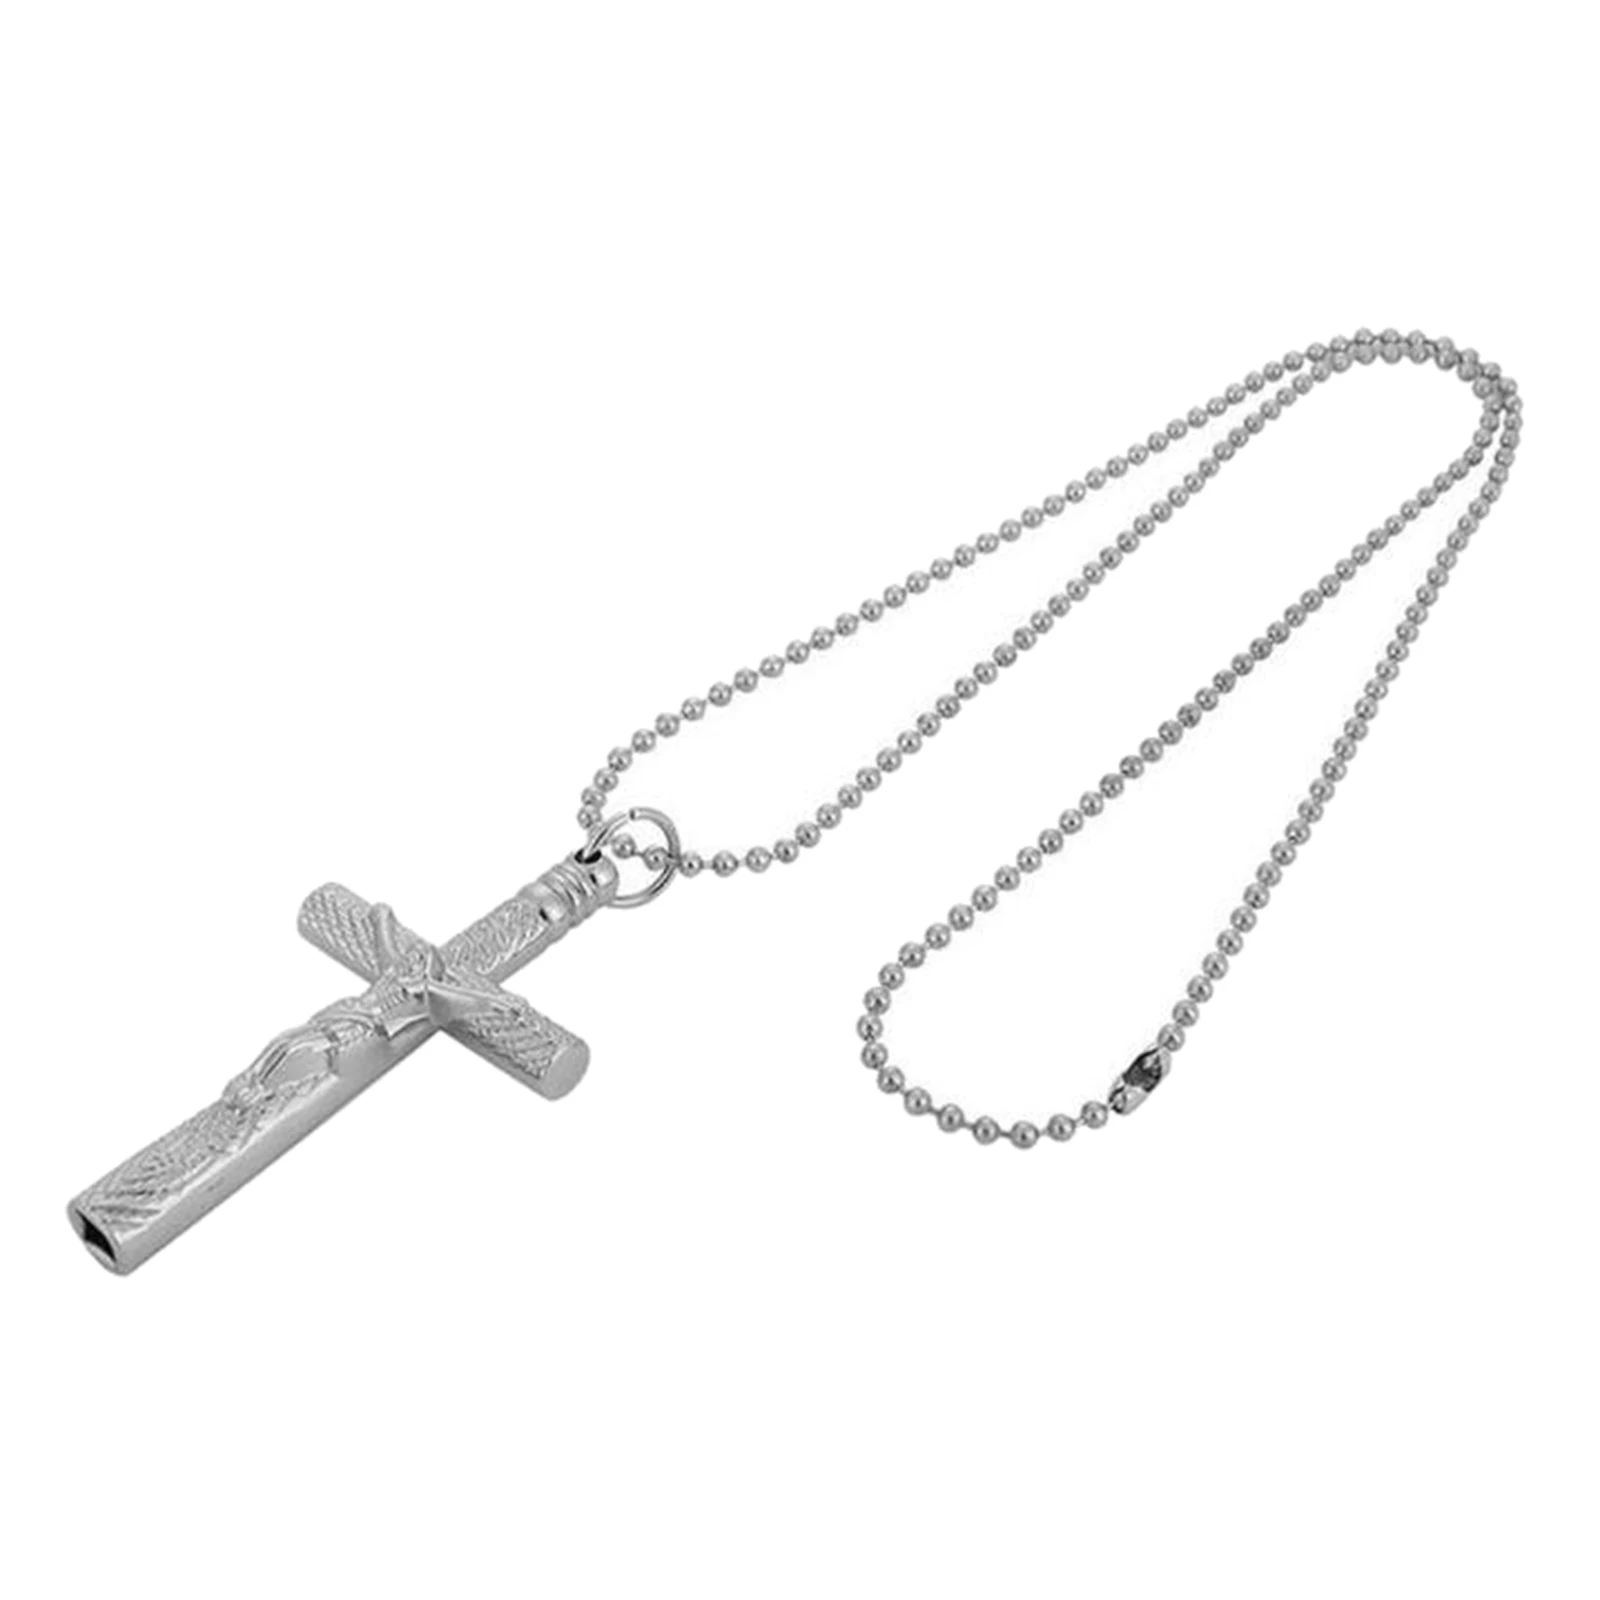 Drum Tuning Key Necklace,Drum Tuning Wrench,Cross Drum Key with Chain Necklace Silver